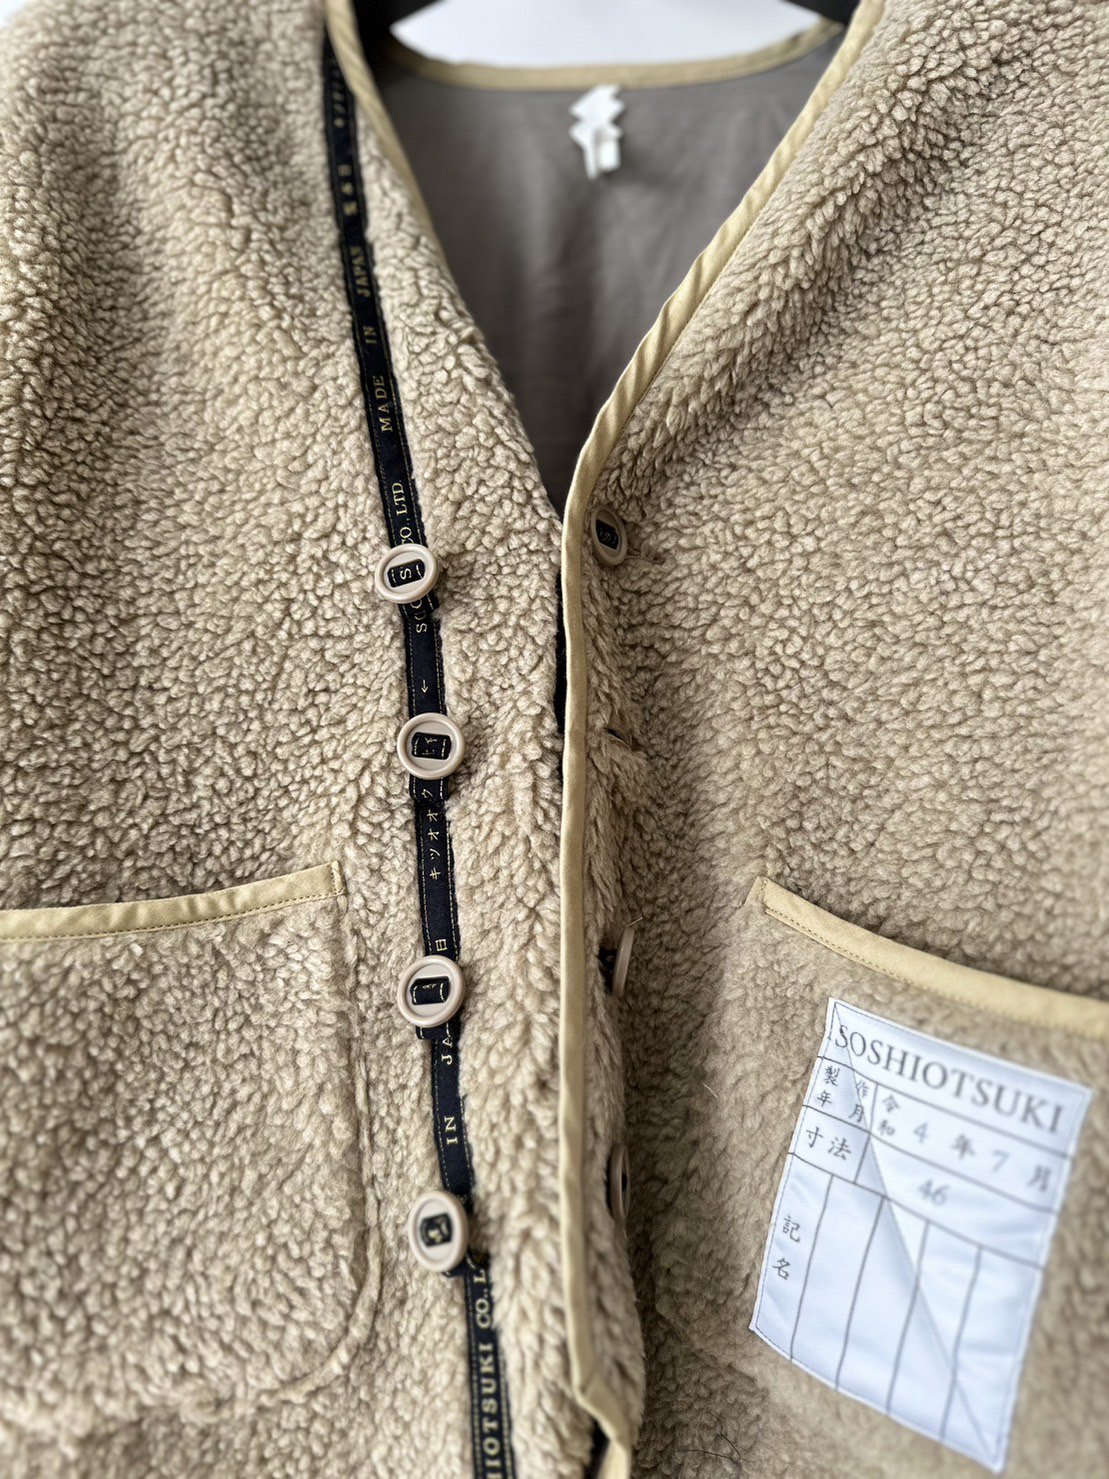 SOSHIOTSUKI<br />LINER GILET / CAMEL<img class='new_mark_img2' src='https://img.shop-pro.jp/img/new/icons14.gif' style='border:none;display:inline;margin:0px;padding:0px;width:auto;' />